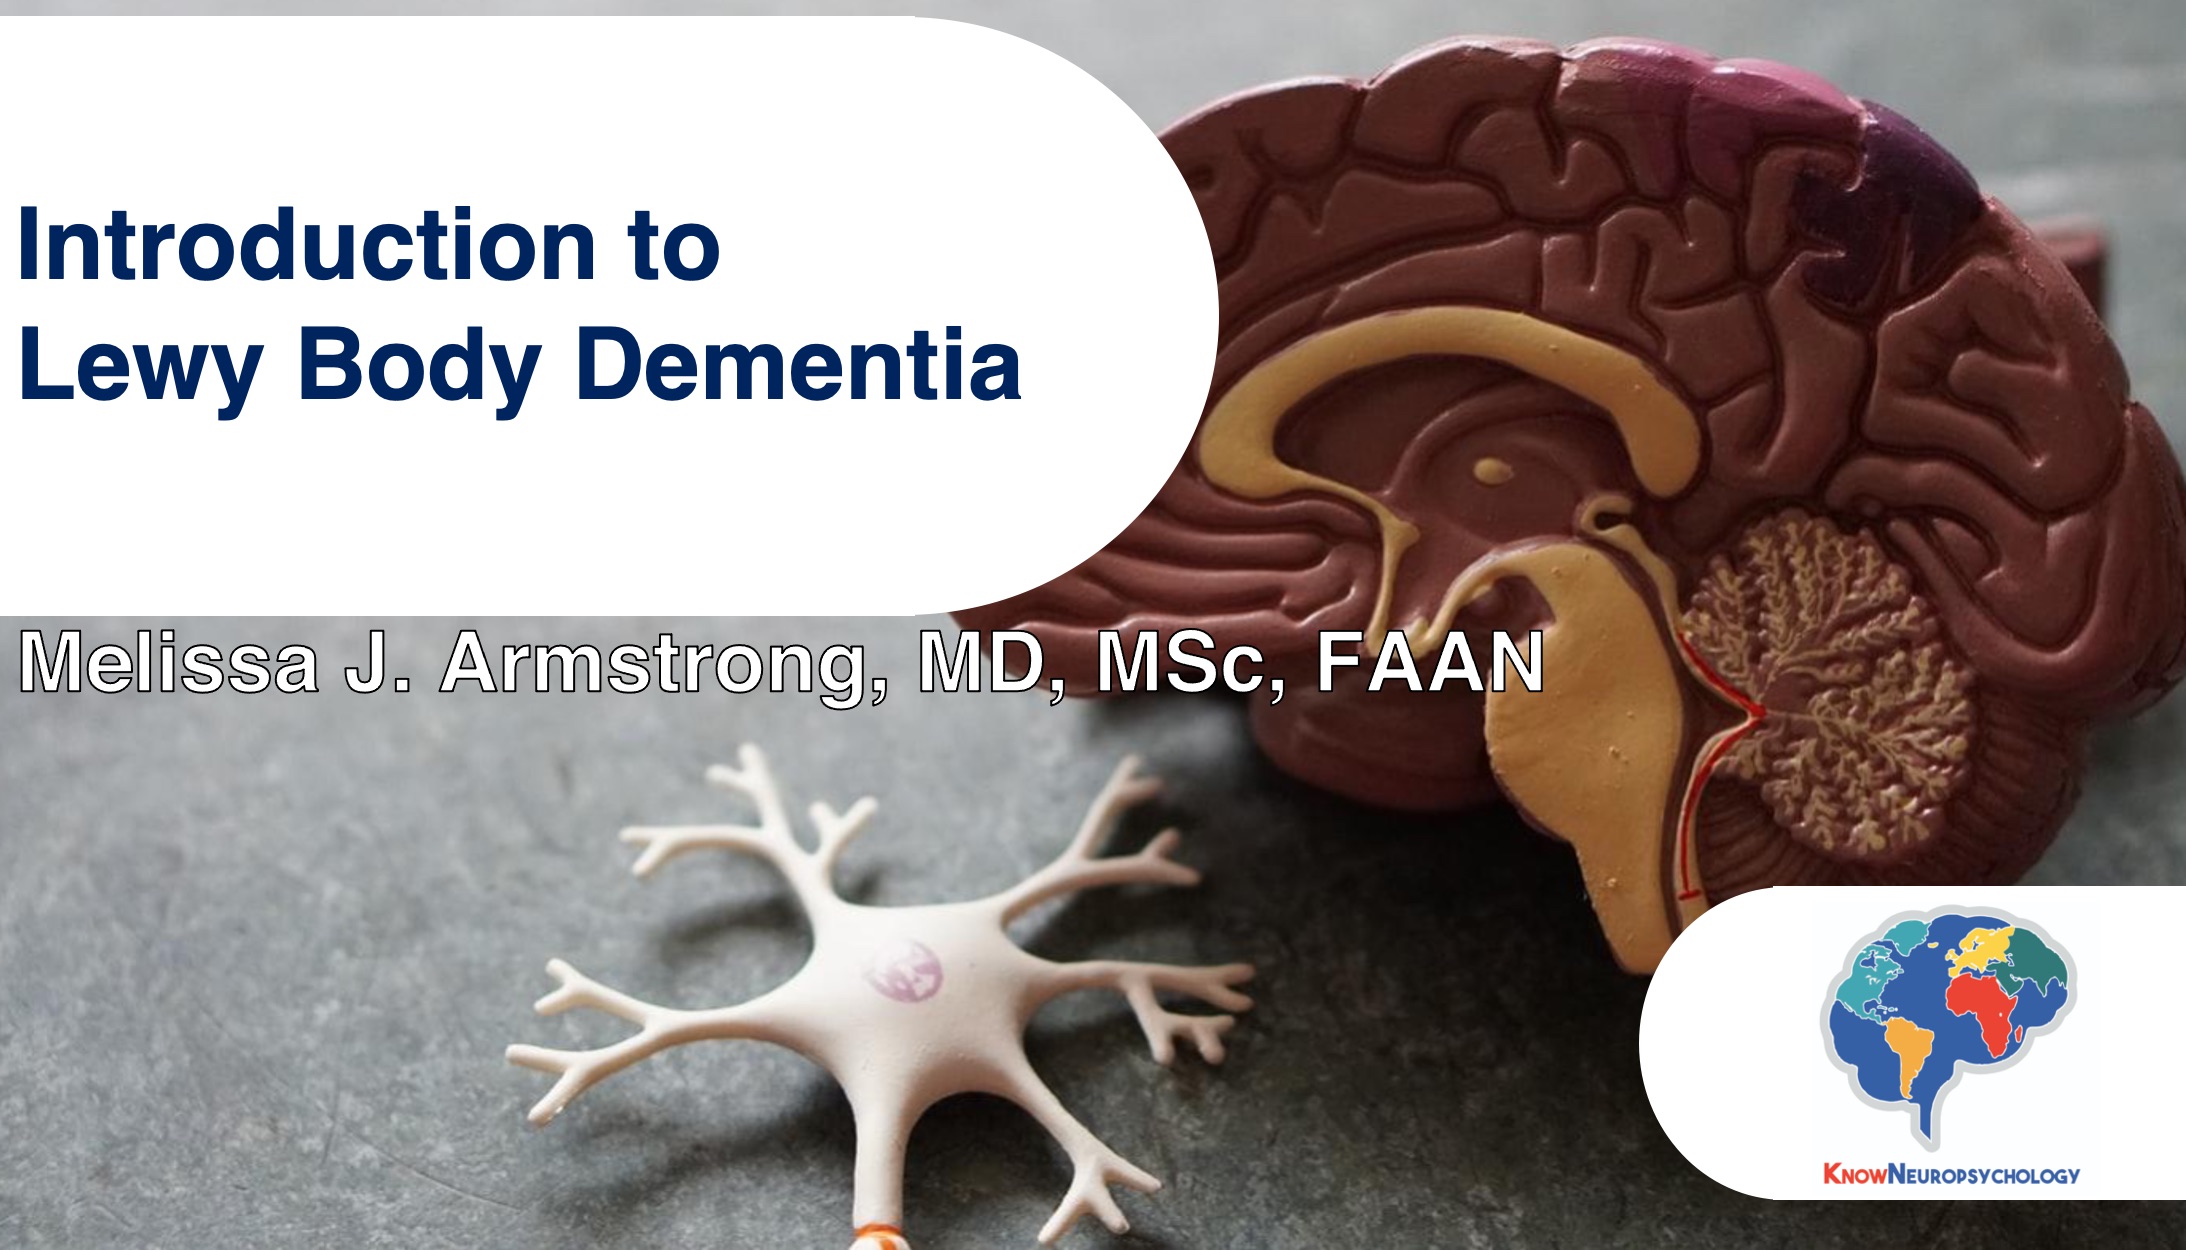 Introduction to Lewy Body Dementia with Dr. Melissa J. Armstrong